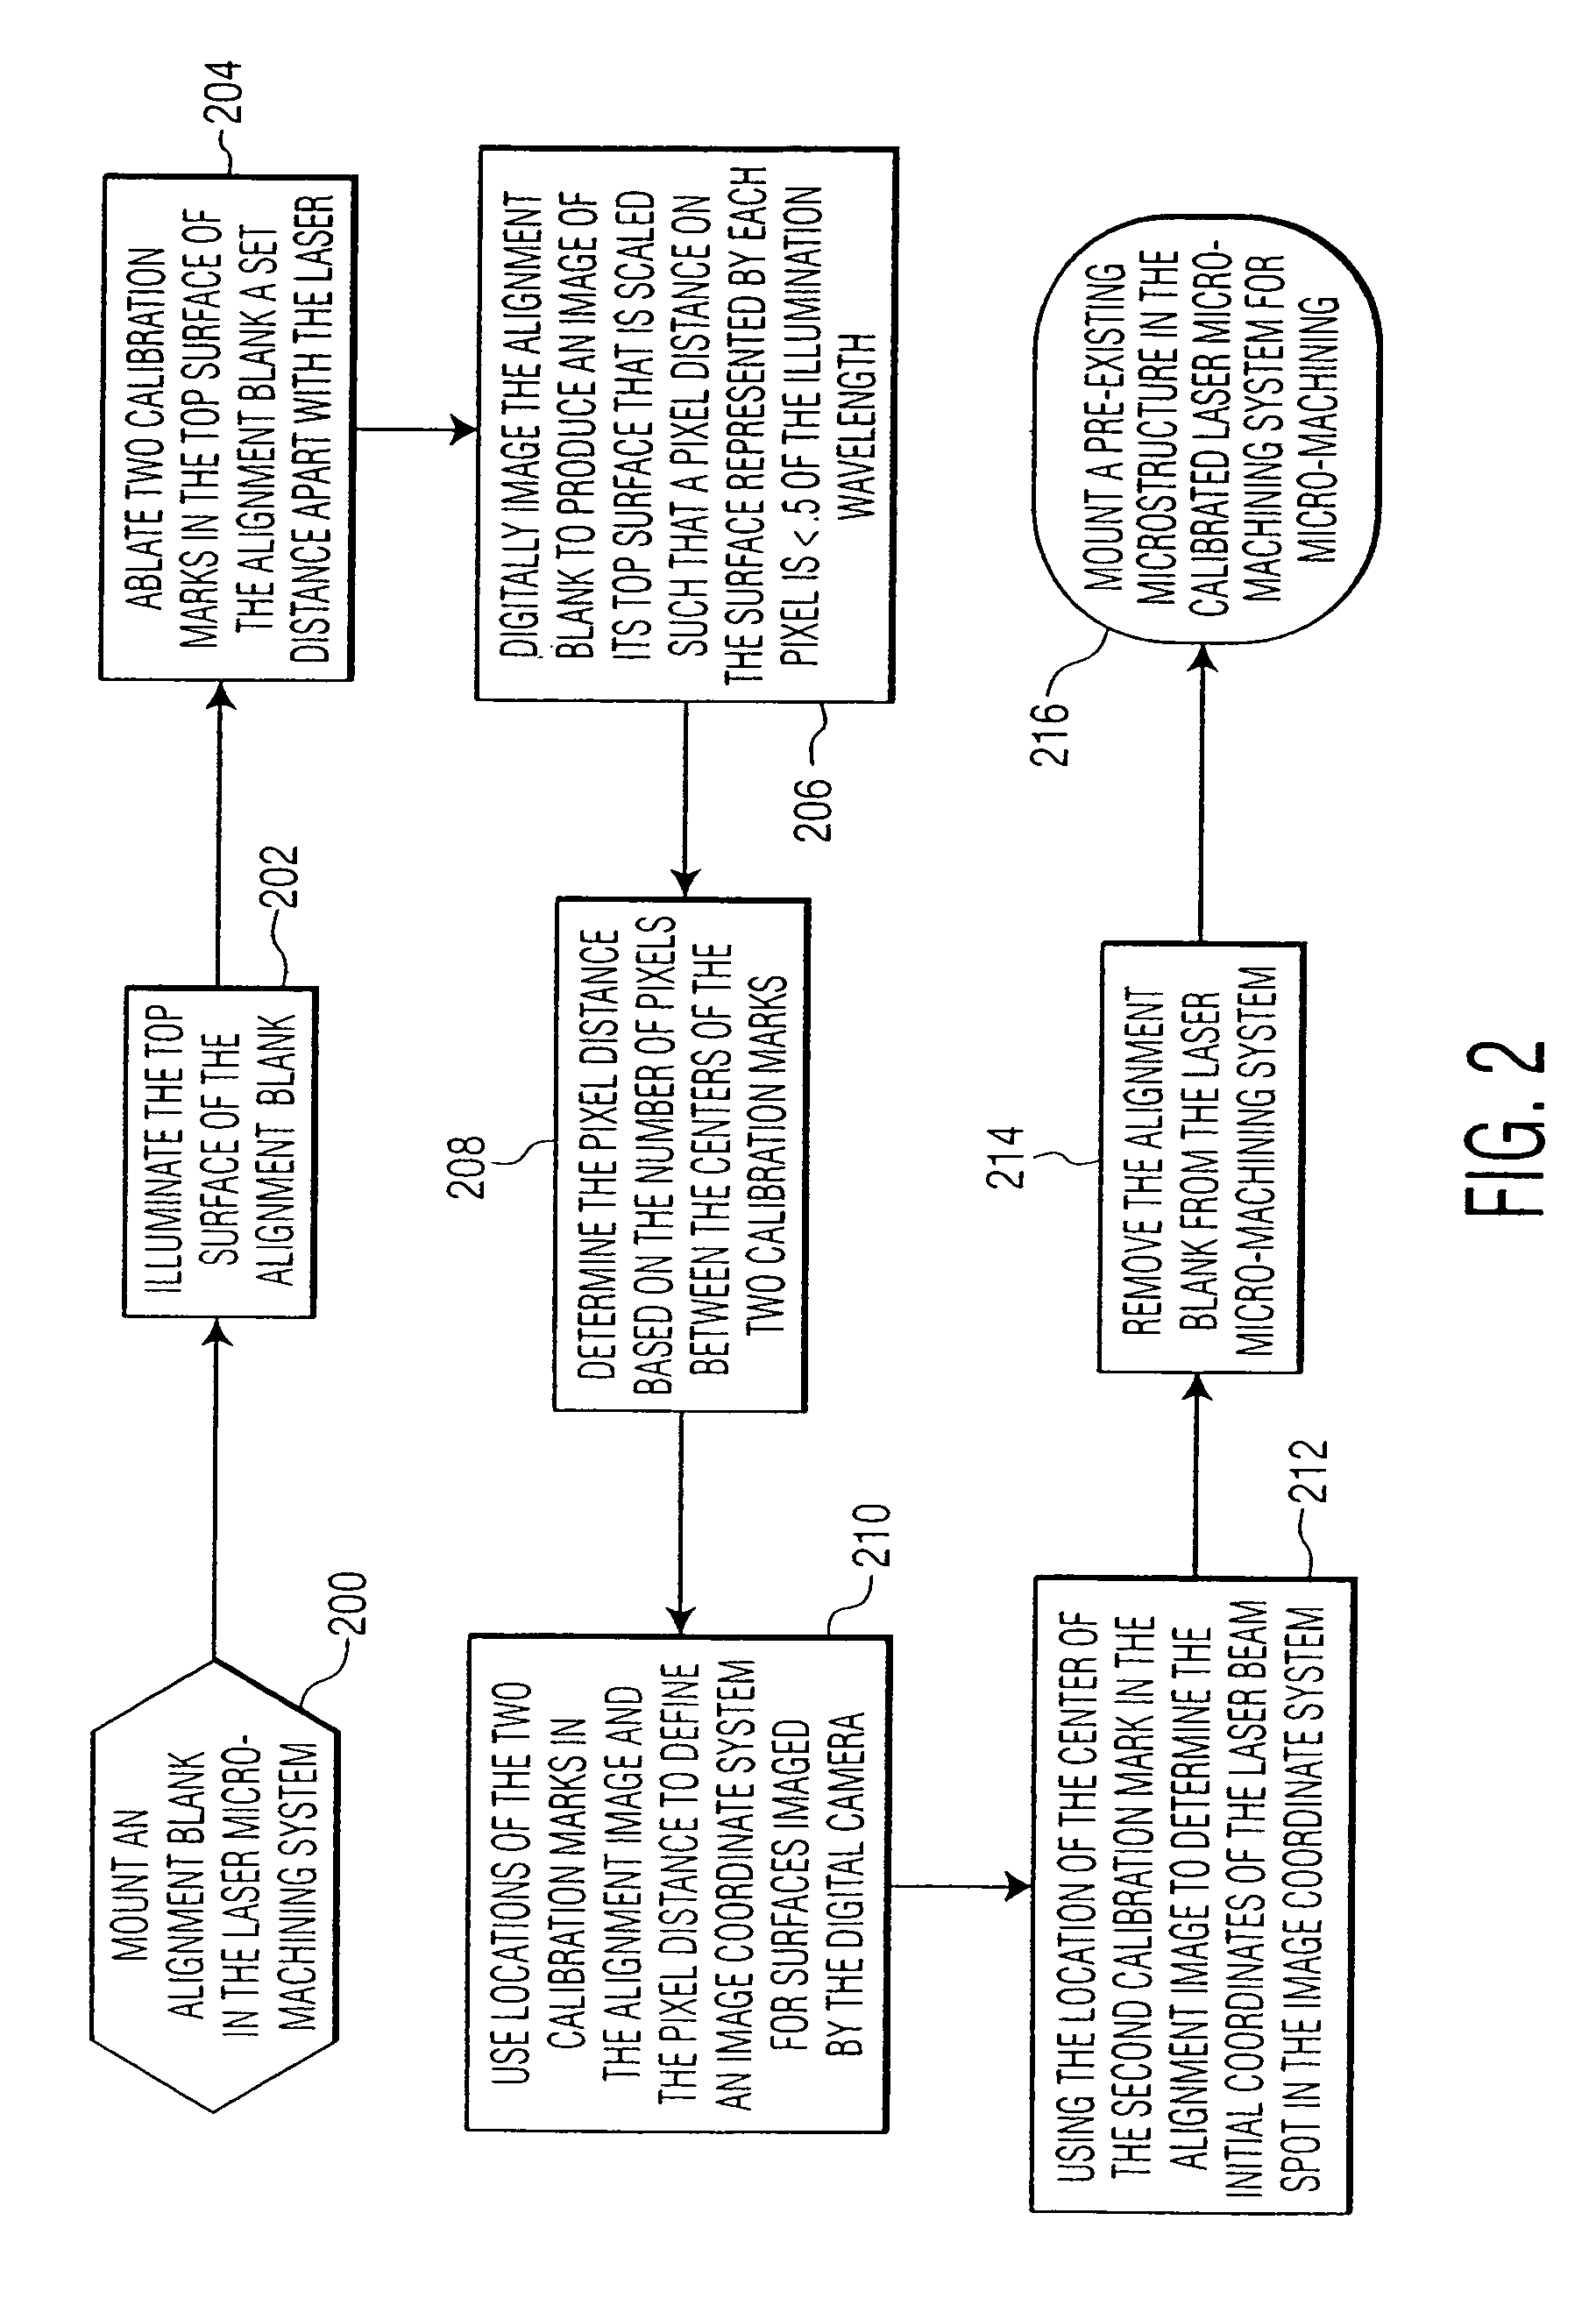 Ultrafast laser direct writing method for modifying existing microstructures on a submicron scale